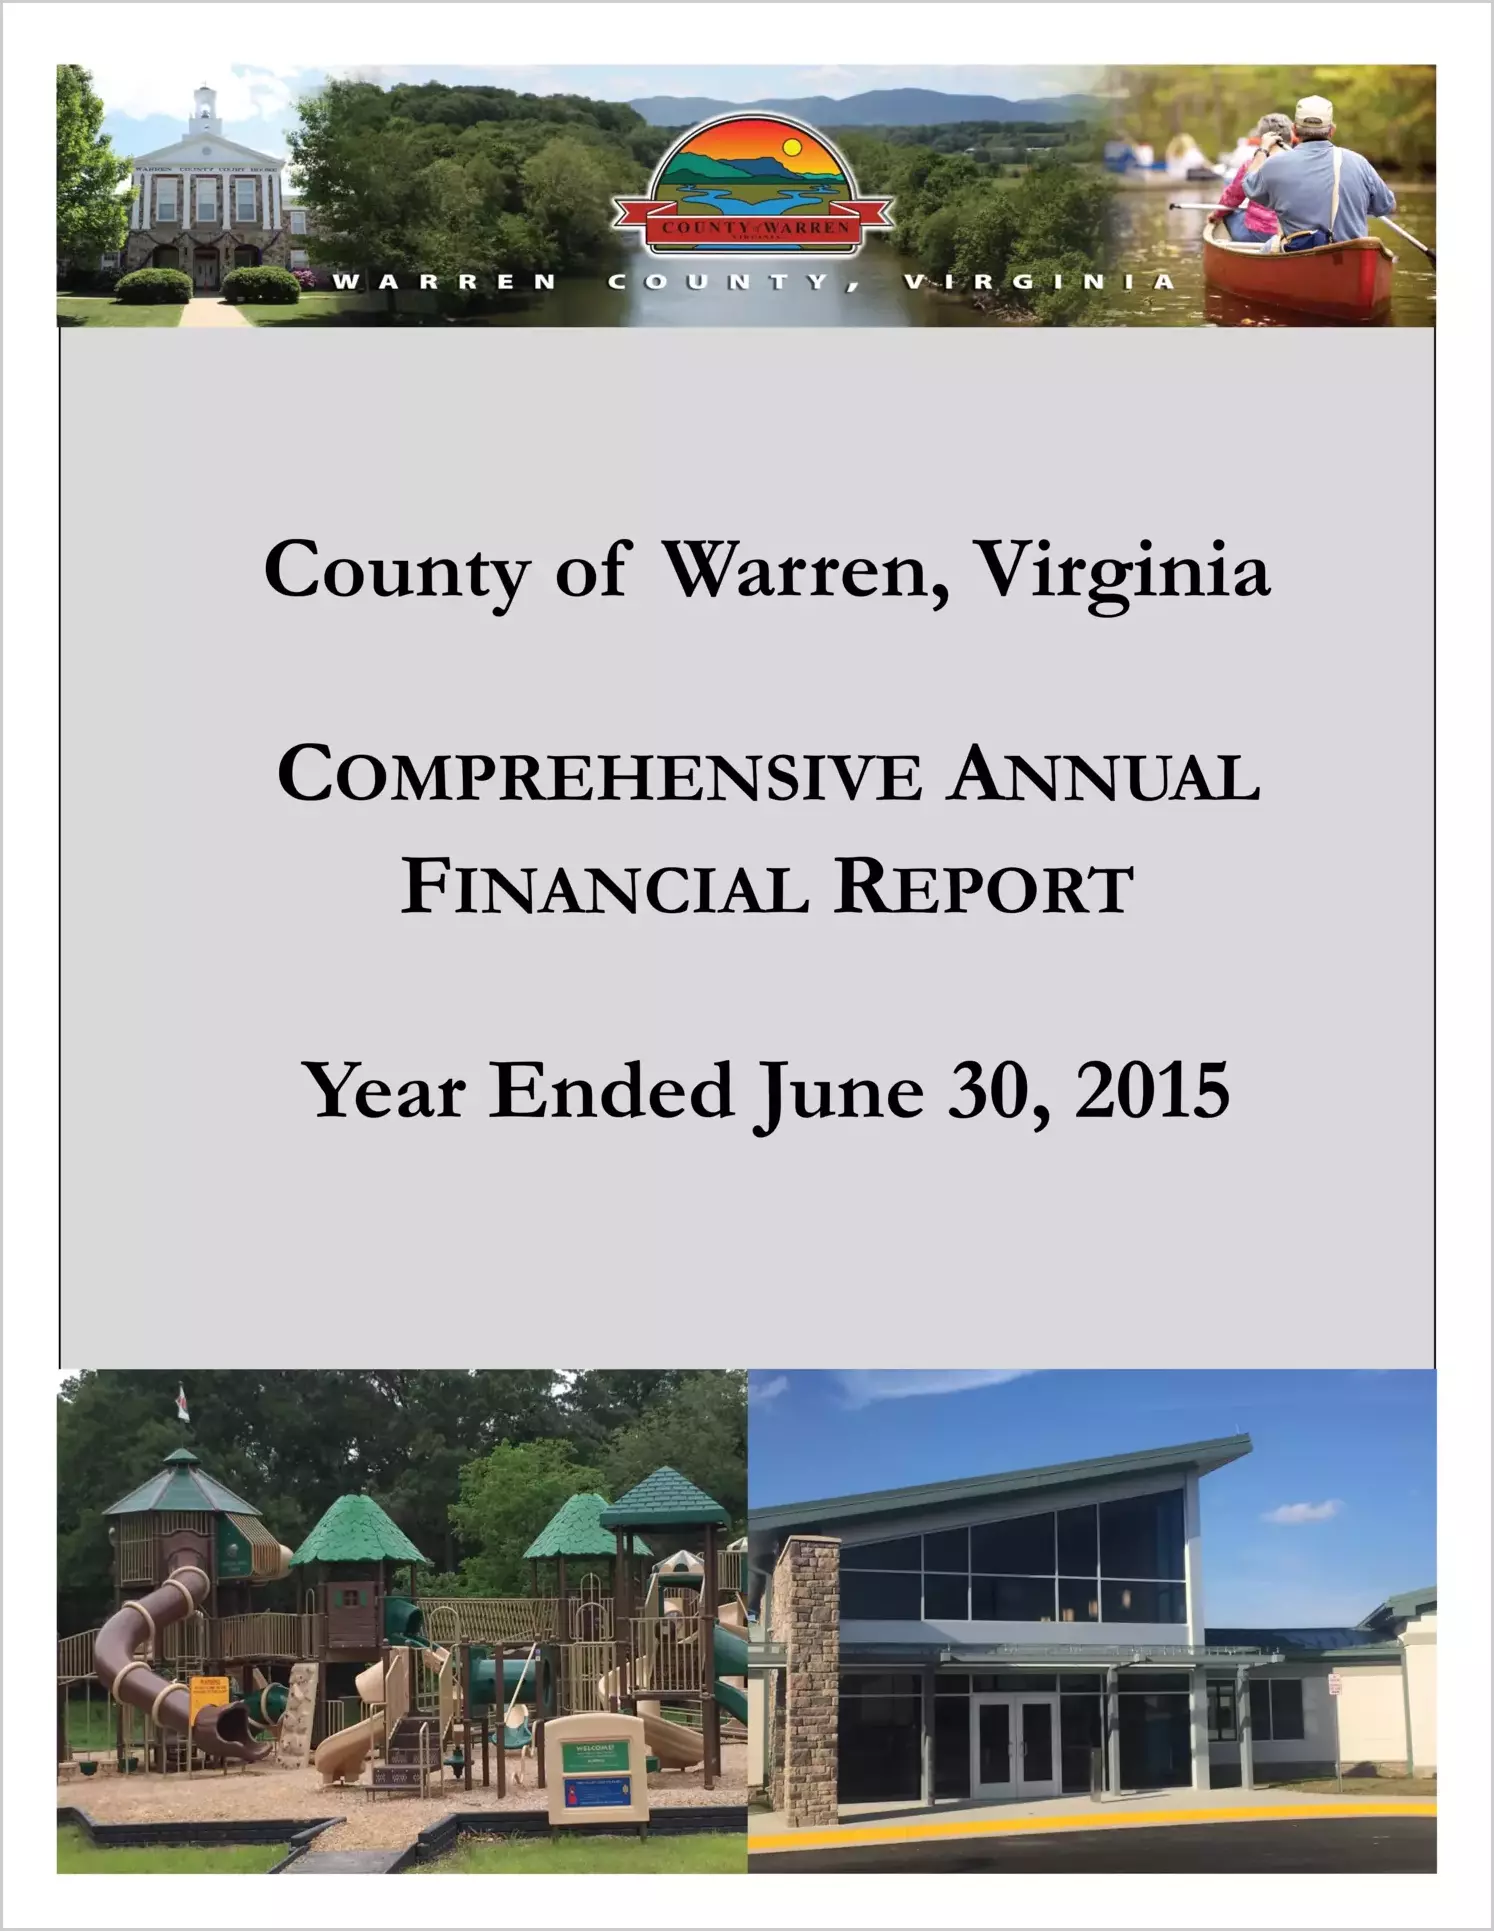 2015 Annual Financial Report for County of Warren